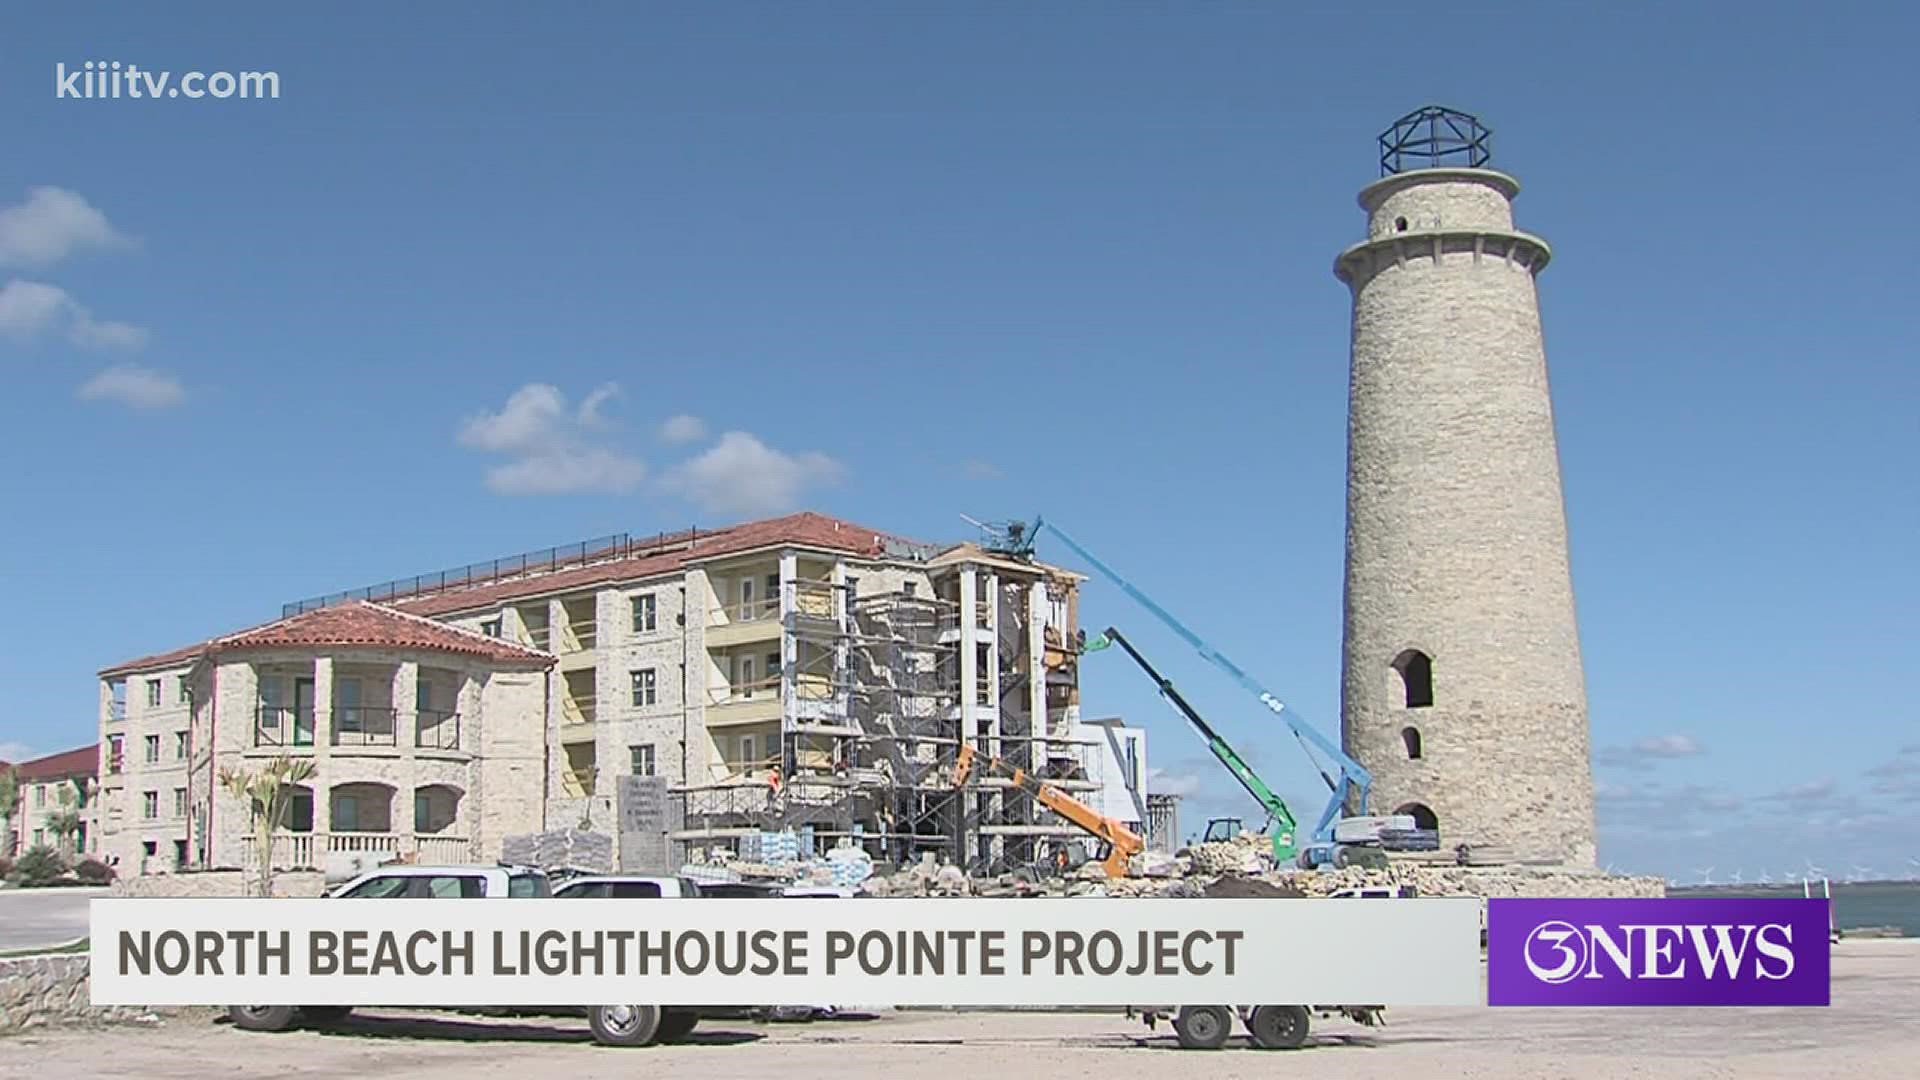 The Lighthouse Pointe Apartment Project located near the foot of the Harbor Bridge along the Nueces Bay Causeway is being built to resemble a Mediterranean village.